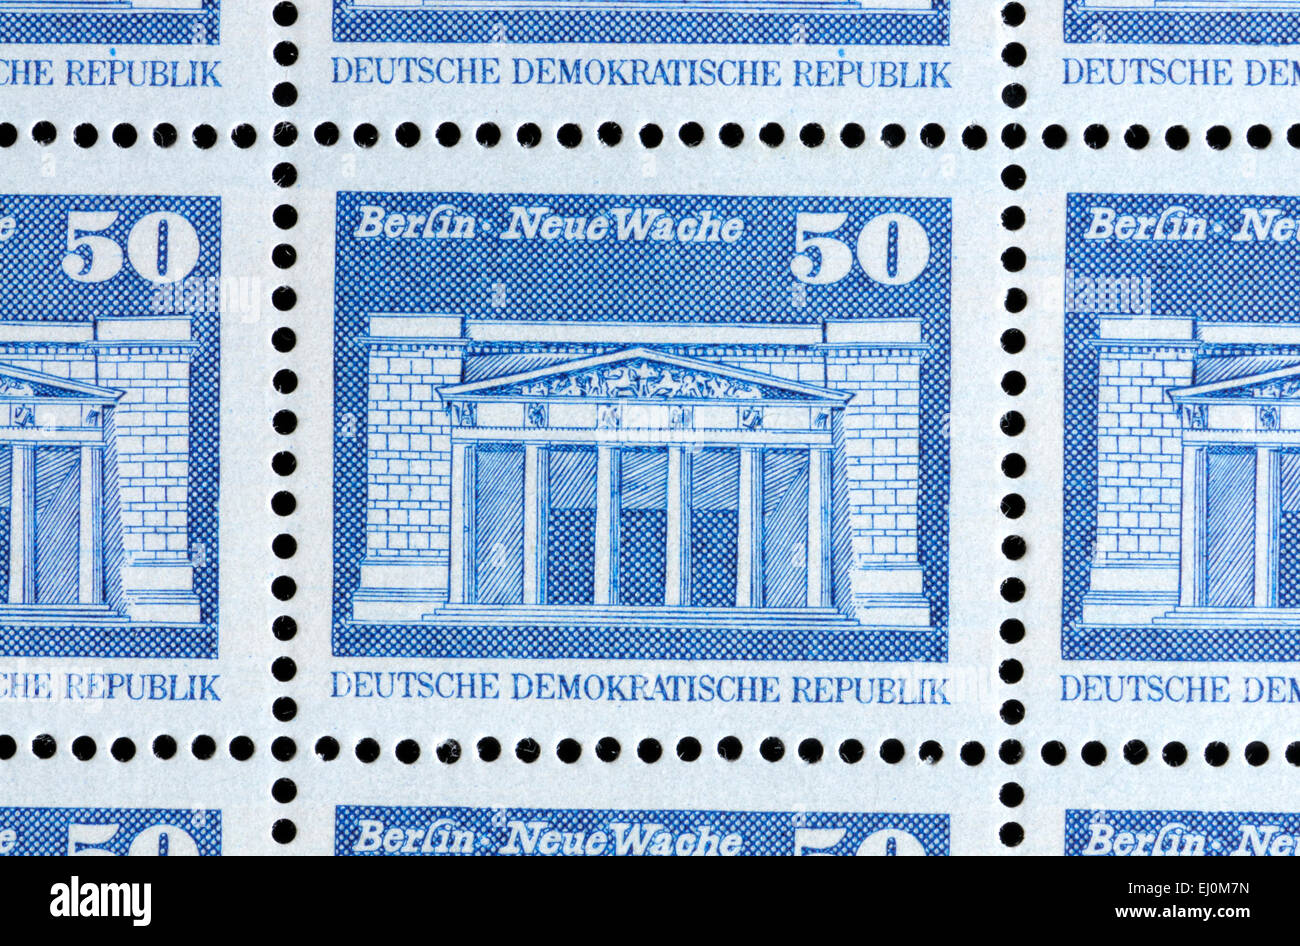 50pf postage stamps from communist DDR ' East Germany showing Neue Wache, Berlin Stock Photo